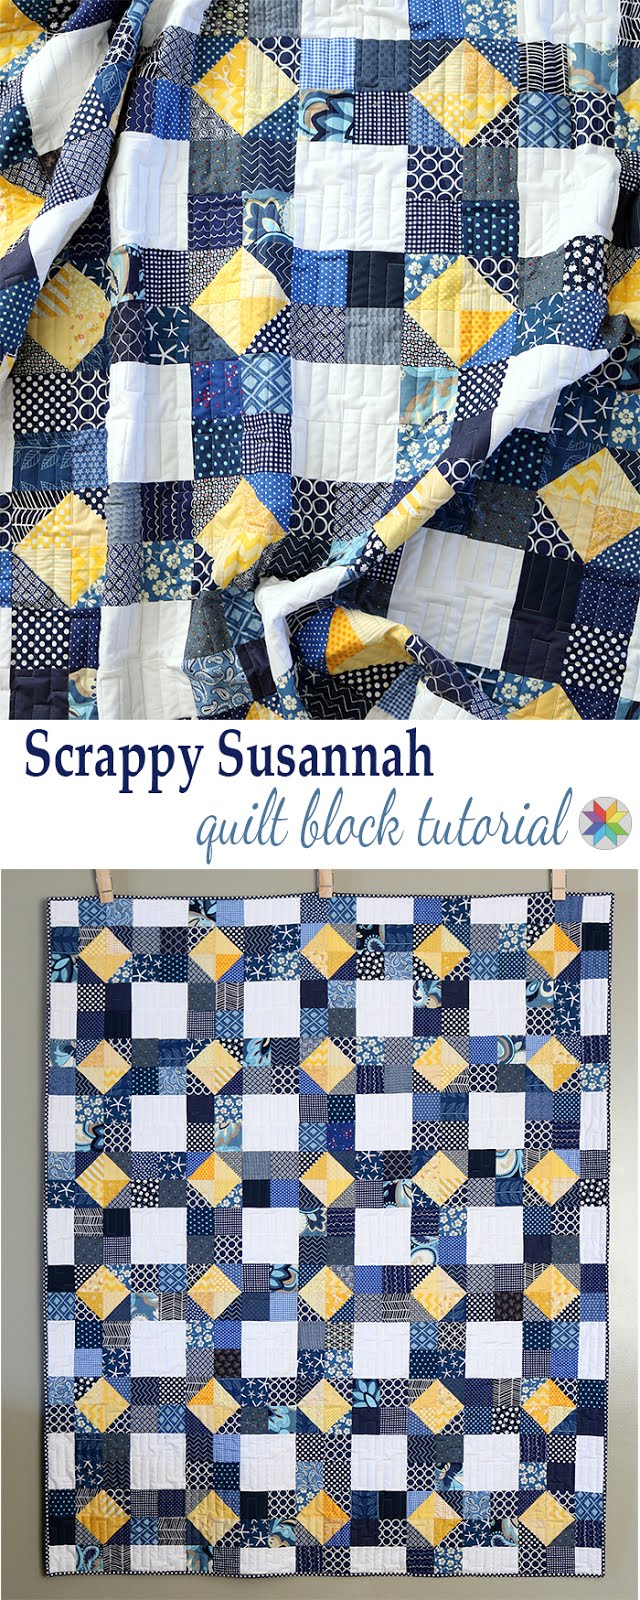 A Bright Corner: Second Look Sunday: Scrappy Susannah Quilt